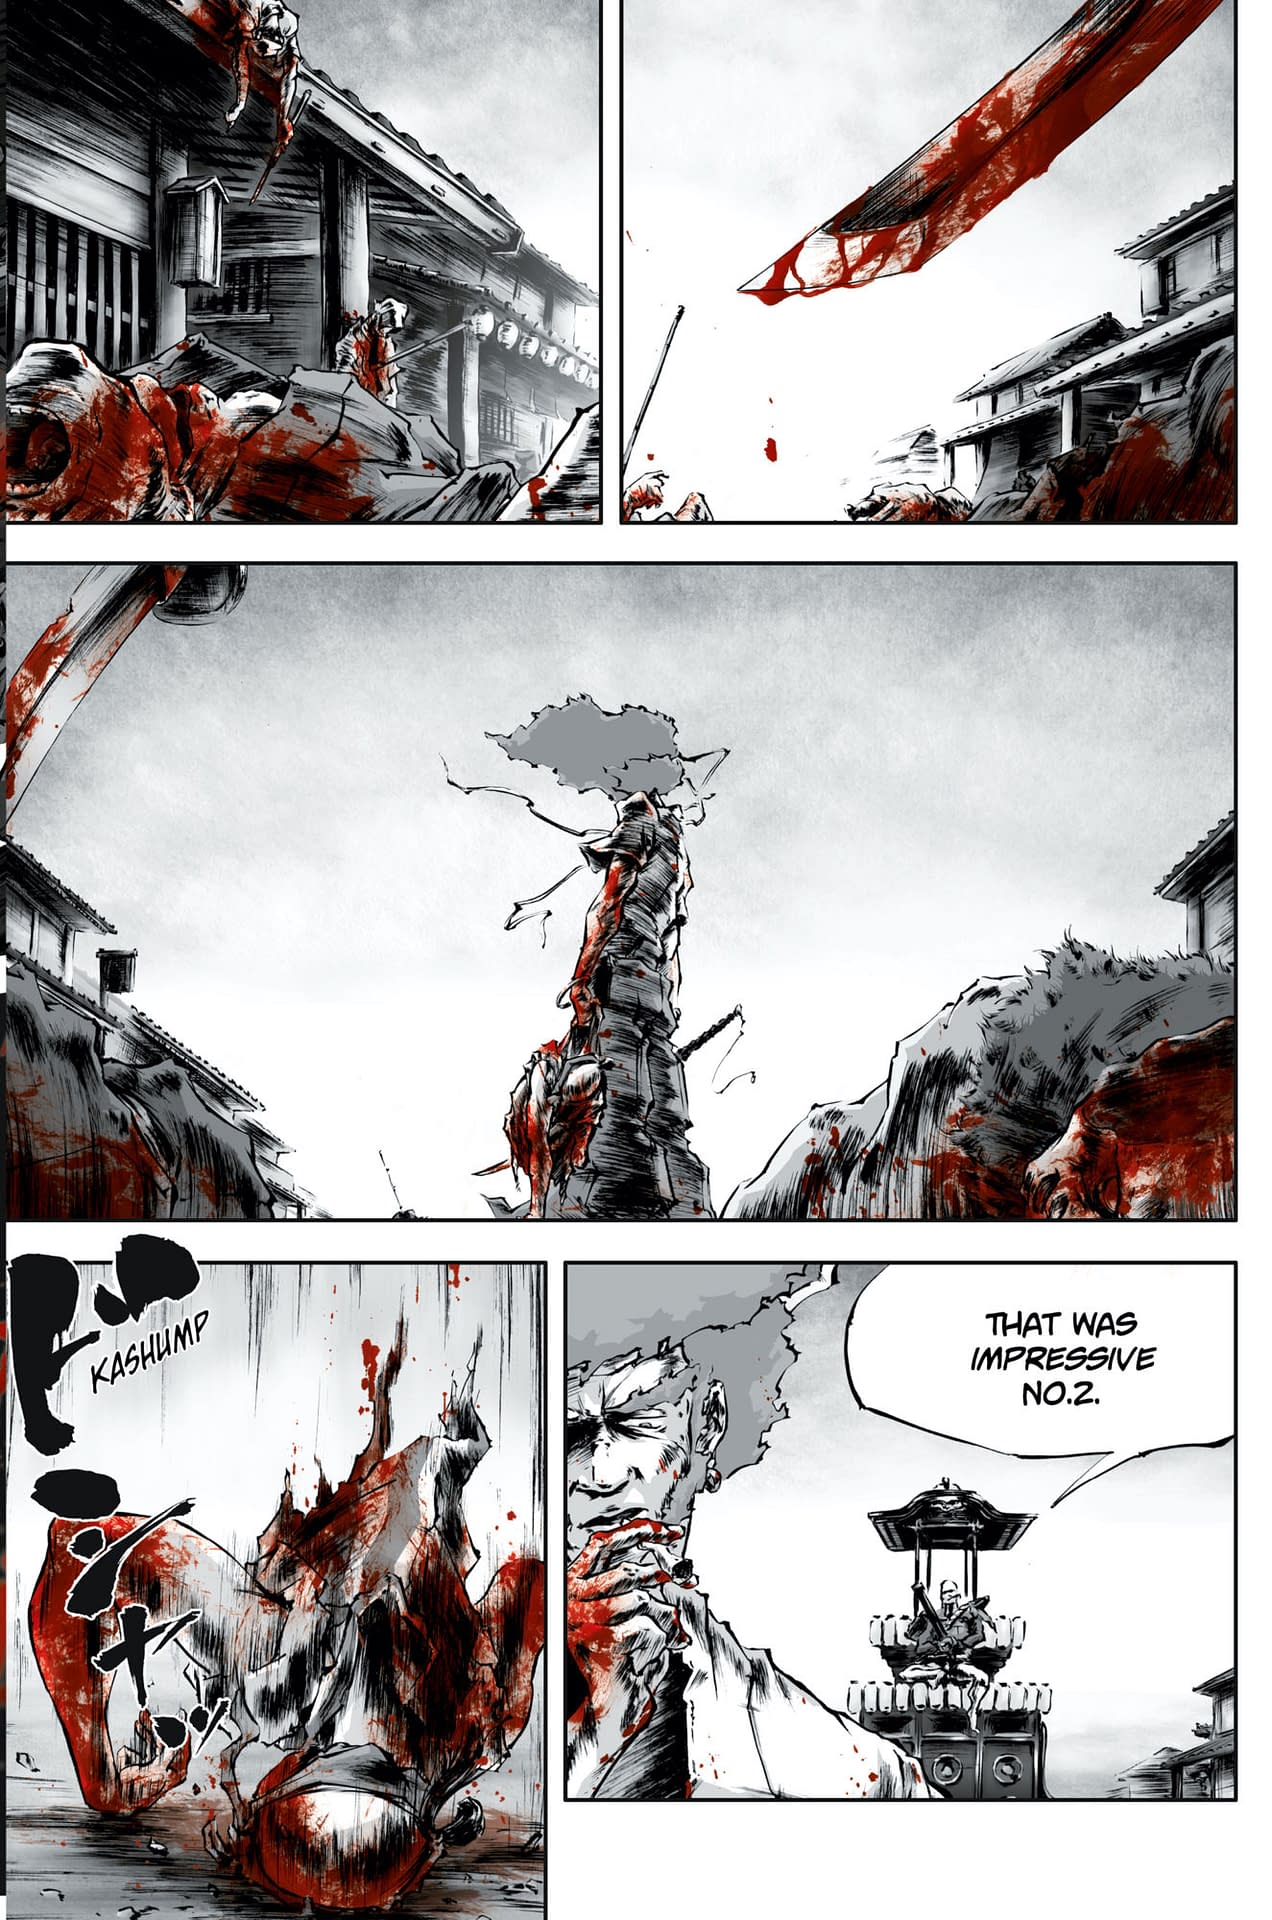 Afro Samurai screenshots, images and pictures - Comic Vine